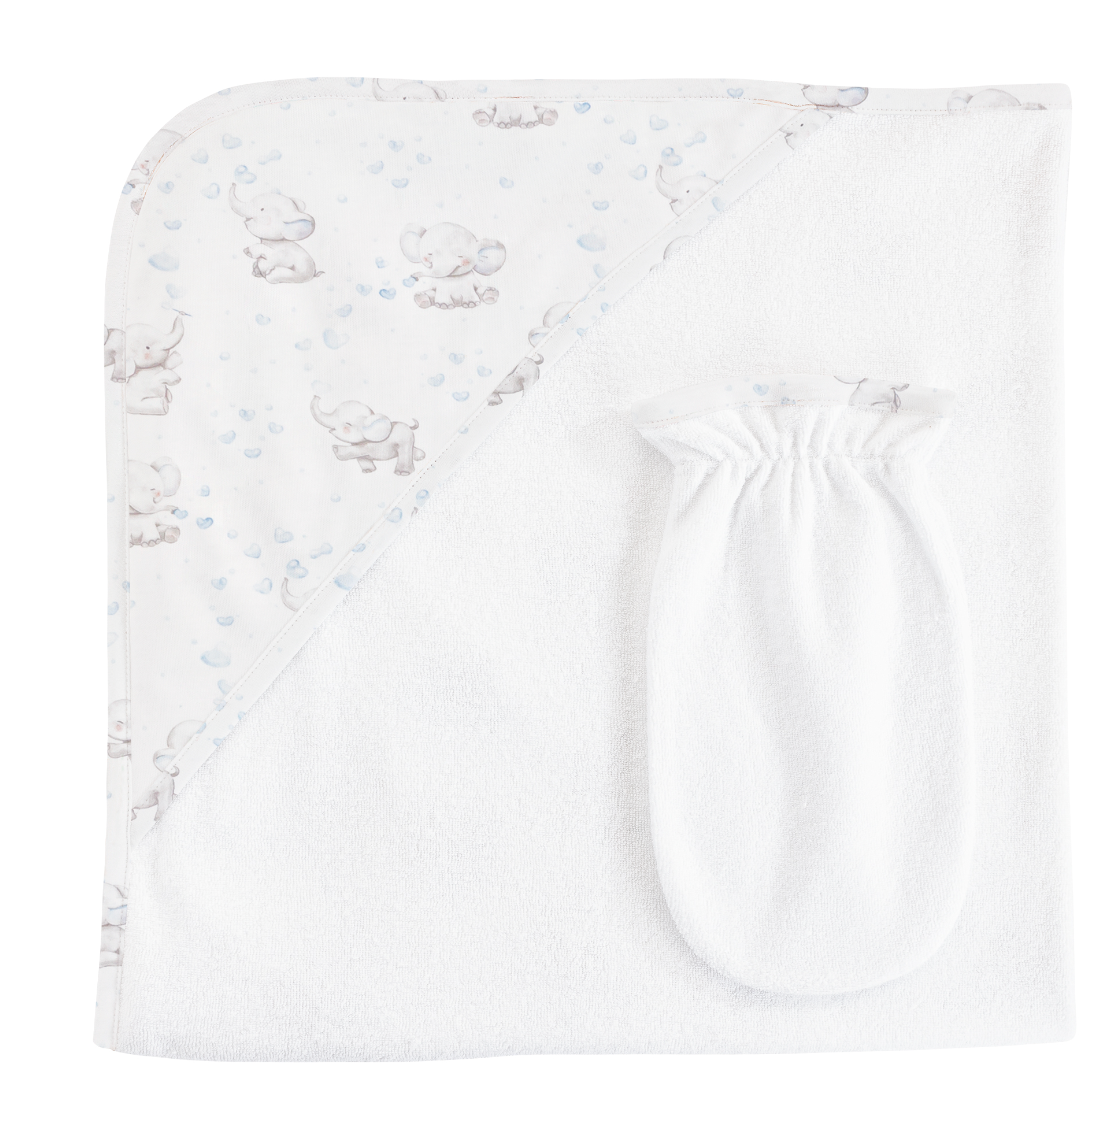 Bubbly Elephant Hooded Towel with Mitt, Blue - Magpies Paducah